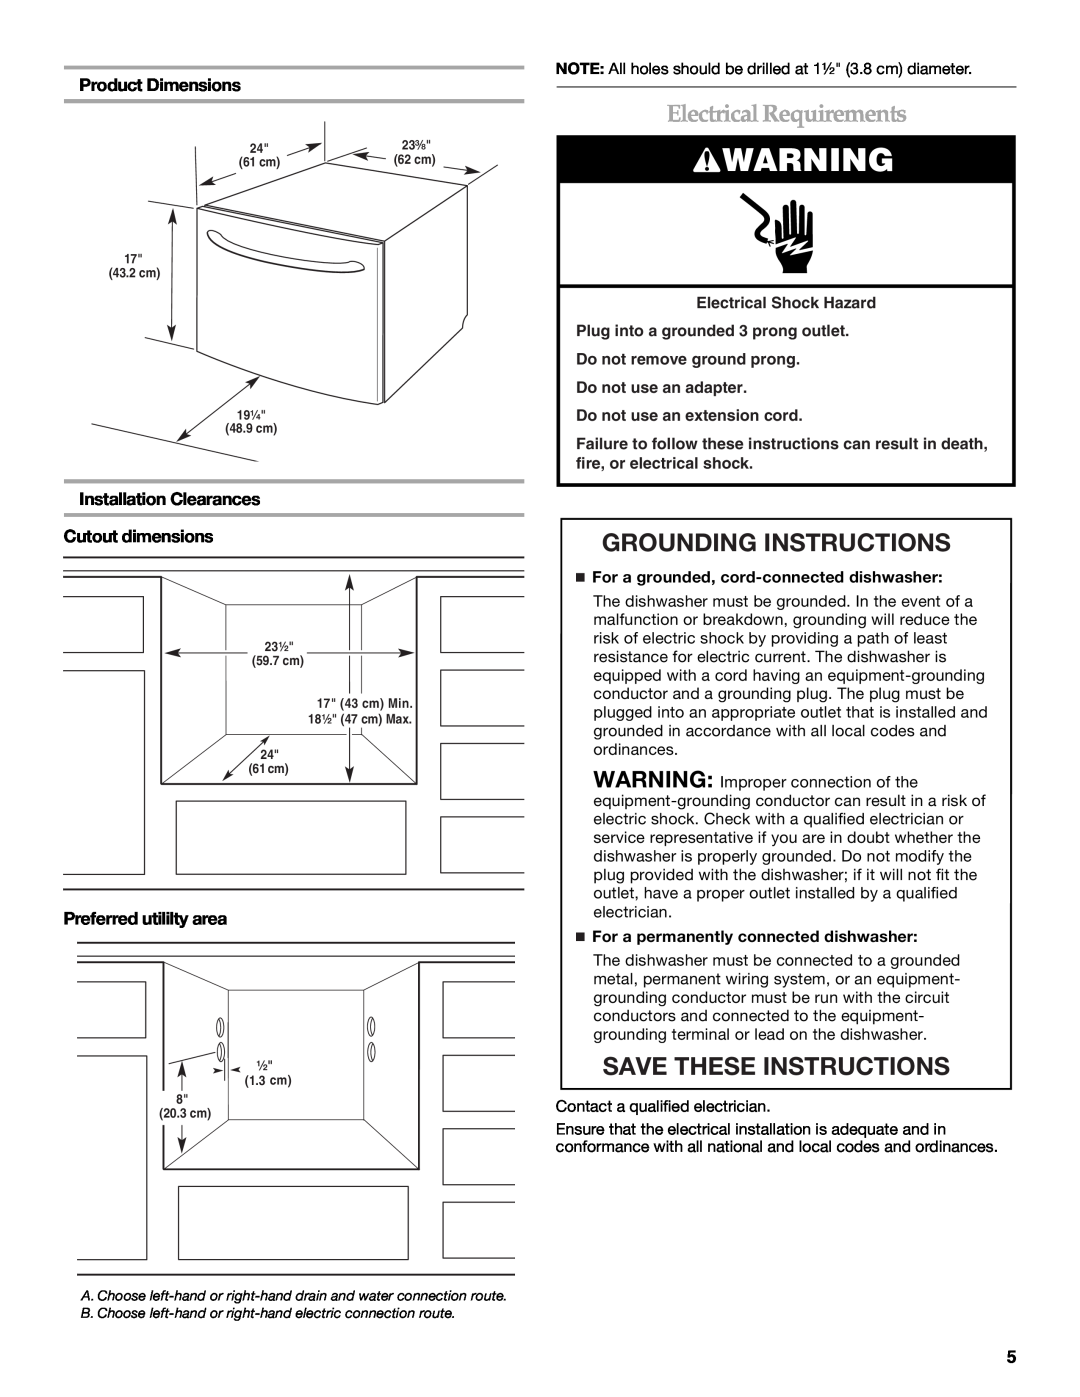 KitchenAid KUDD03STBL Electrical Requirements, Grounding Instructions, Save These Instructions, Product Dimensions 